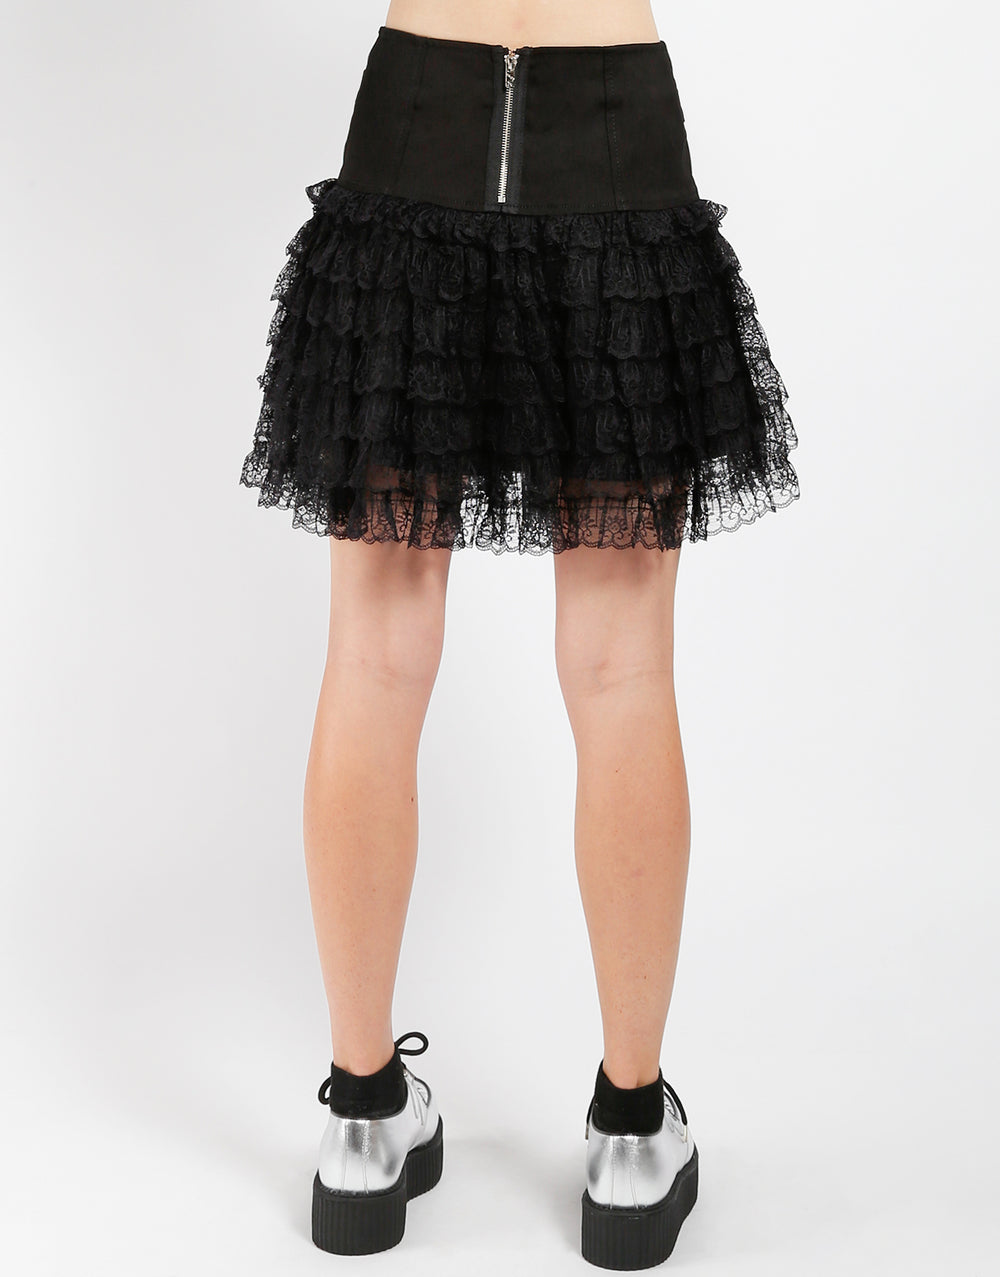 TRIPP NYC - LACE TO LACE SKIRT